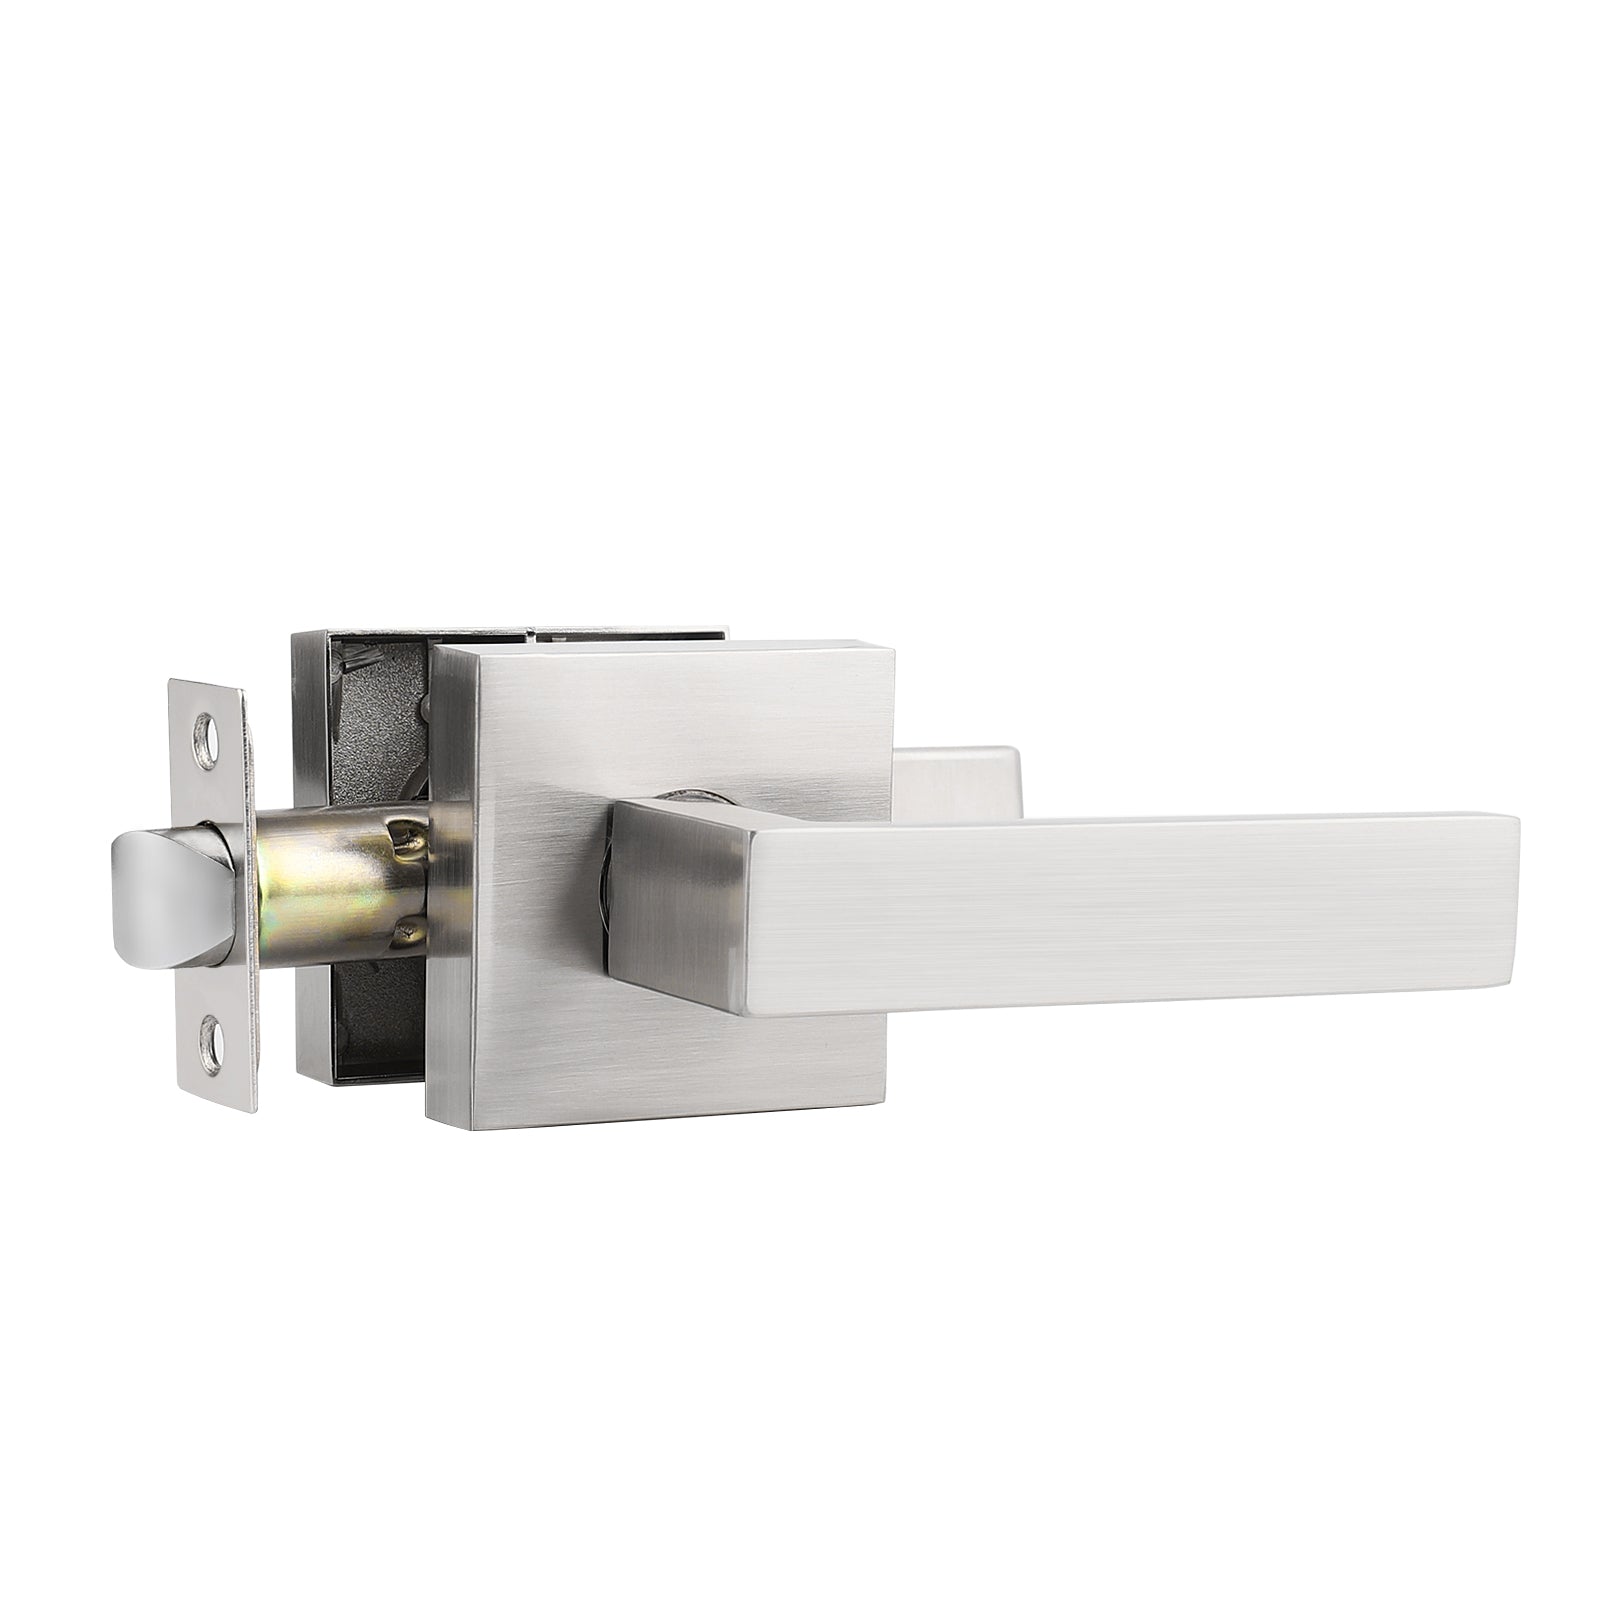 Front Door Levers and Double Cylinder Deadbolts Lock Set (Keyed Alike), Satin Nickel Finish - Probrico